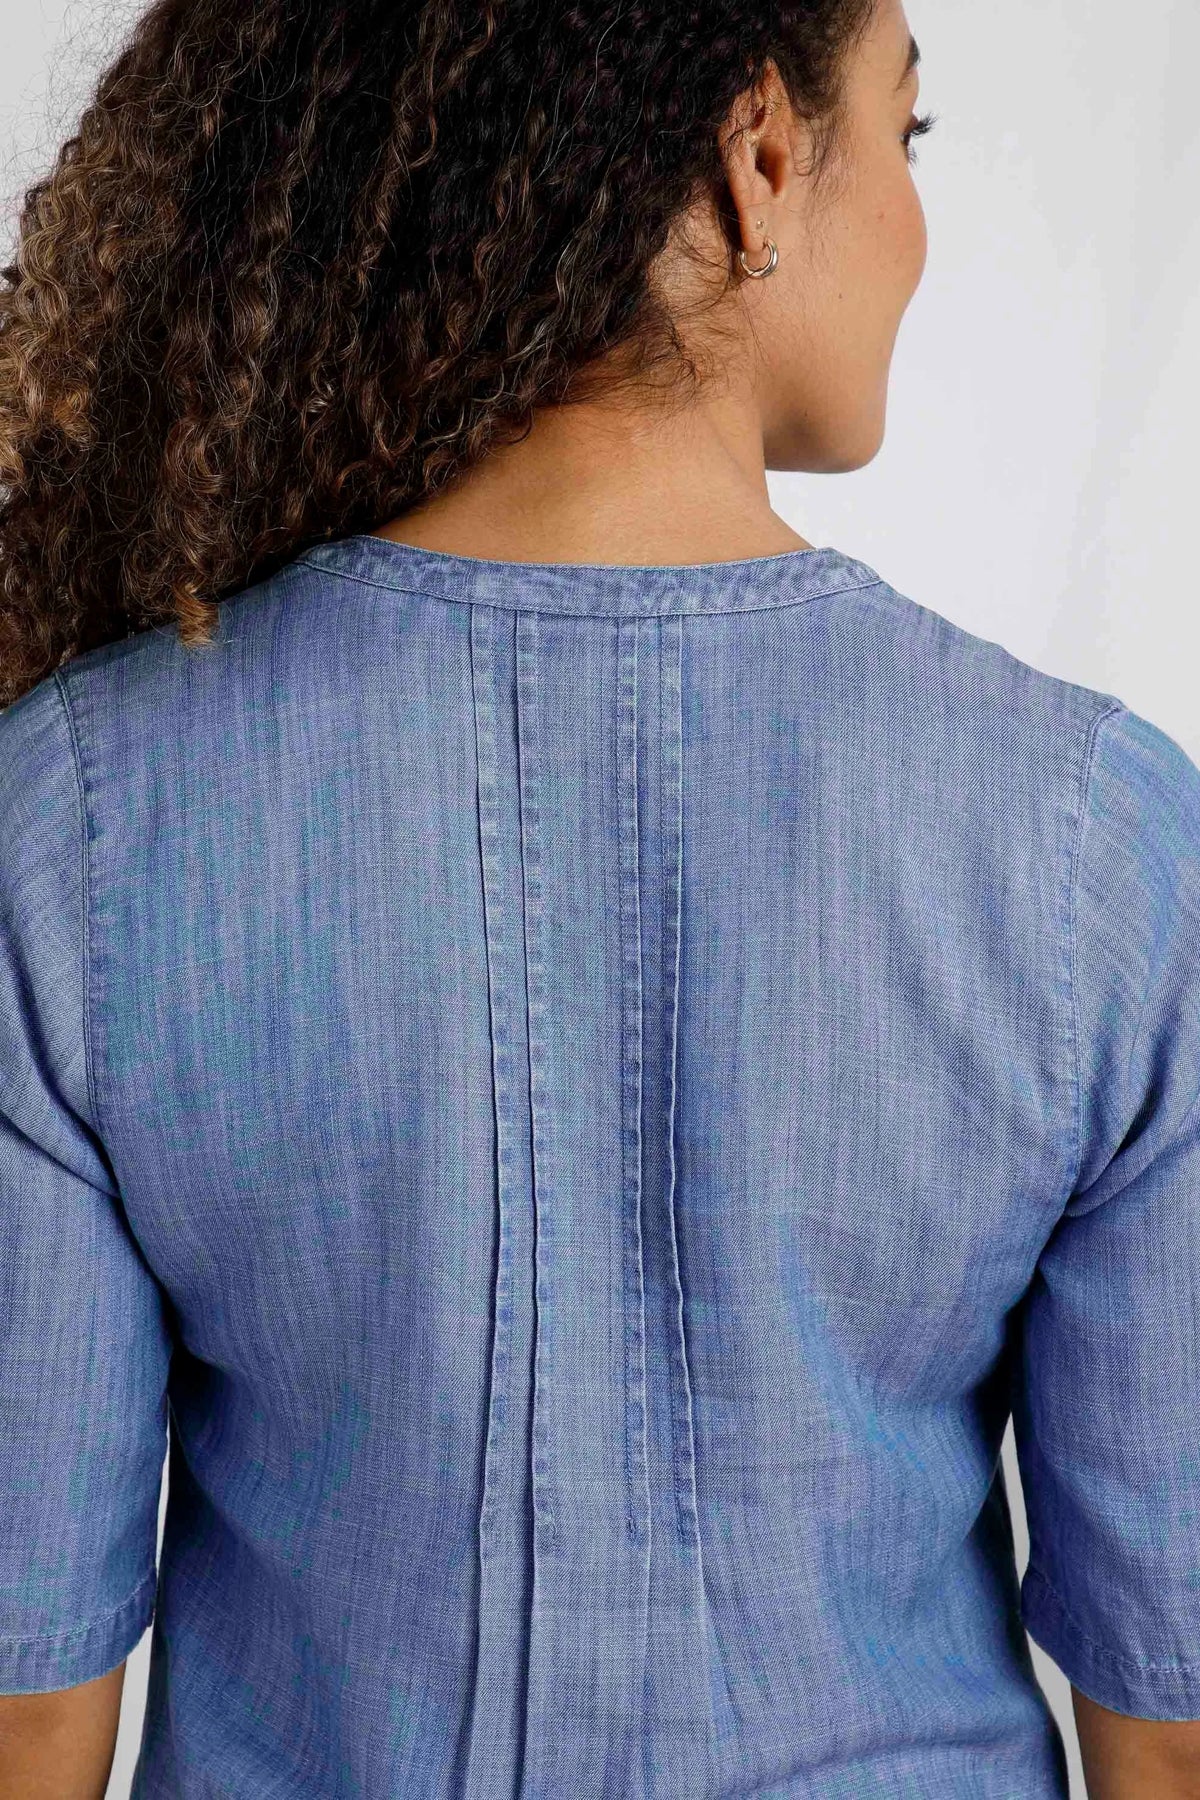 Women's Moa Tencel tunic in Denim Blue from Weird Fish with pintuck back detail.